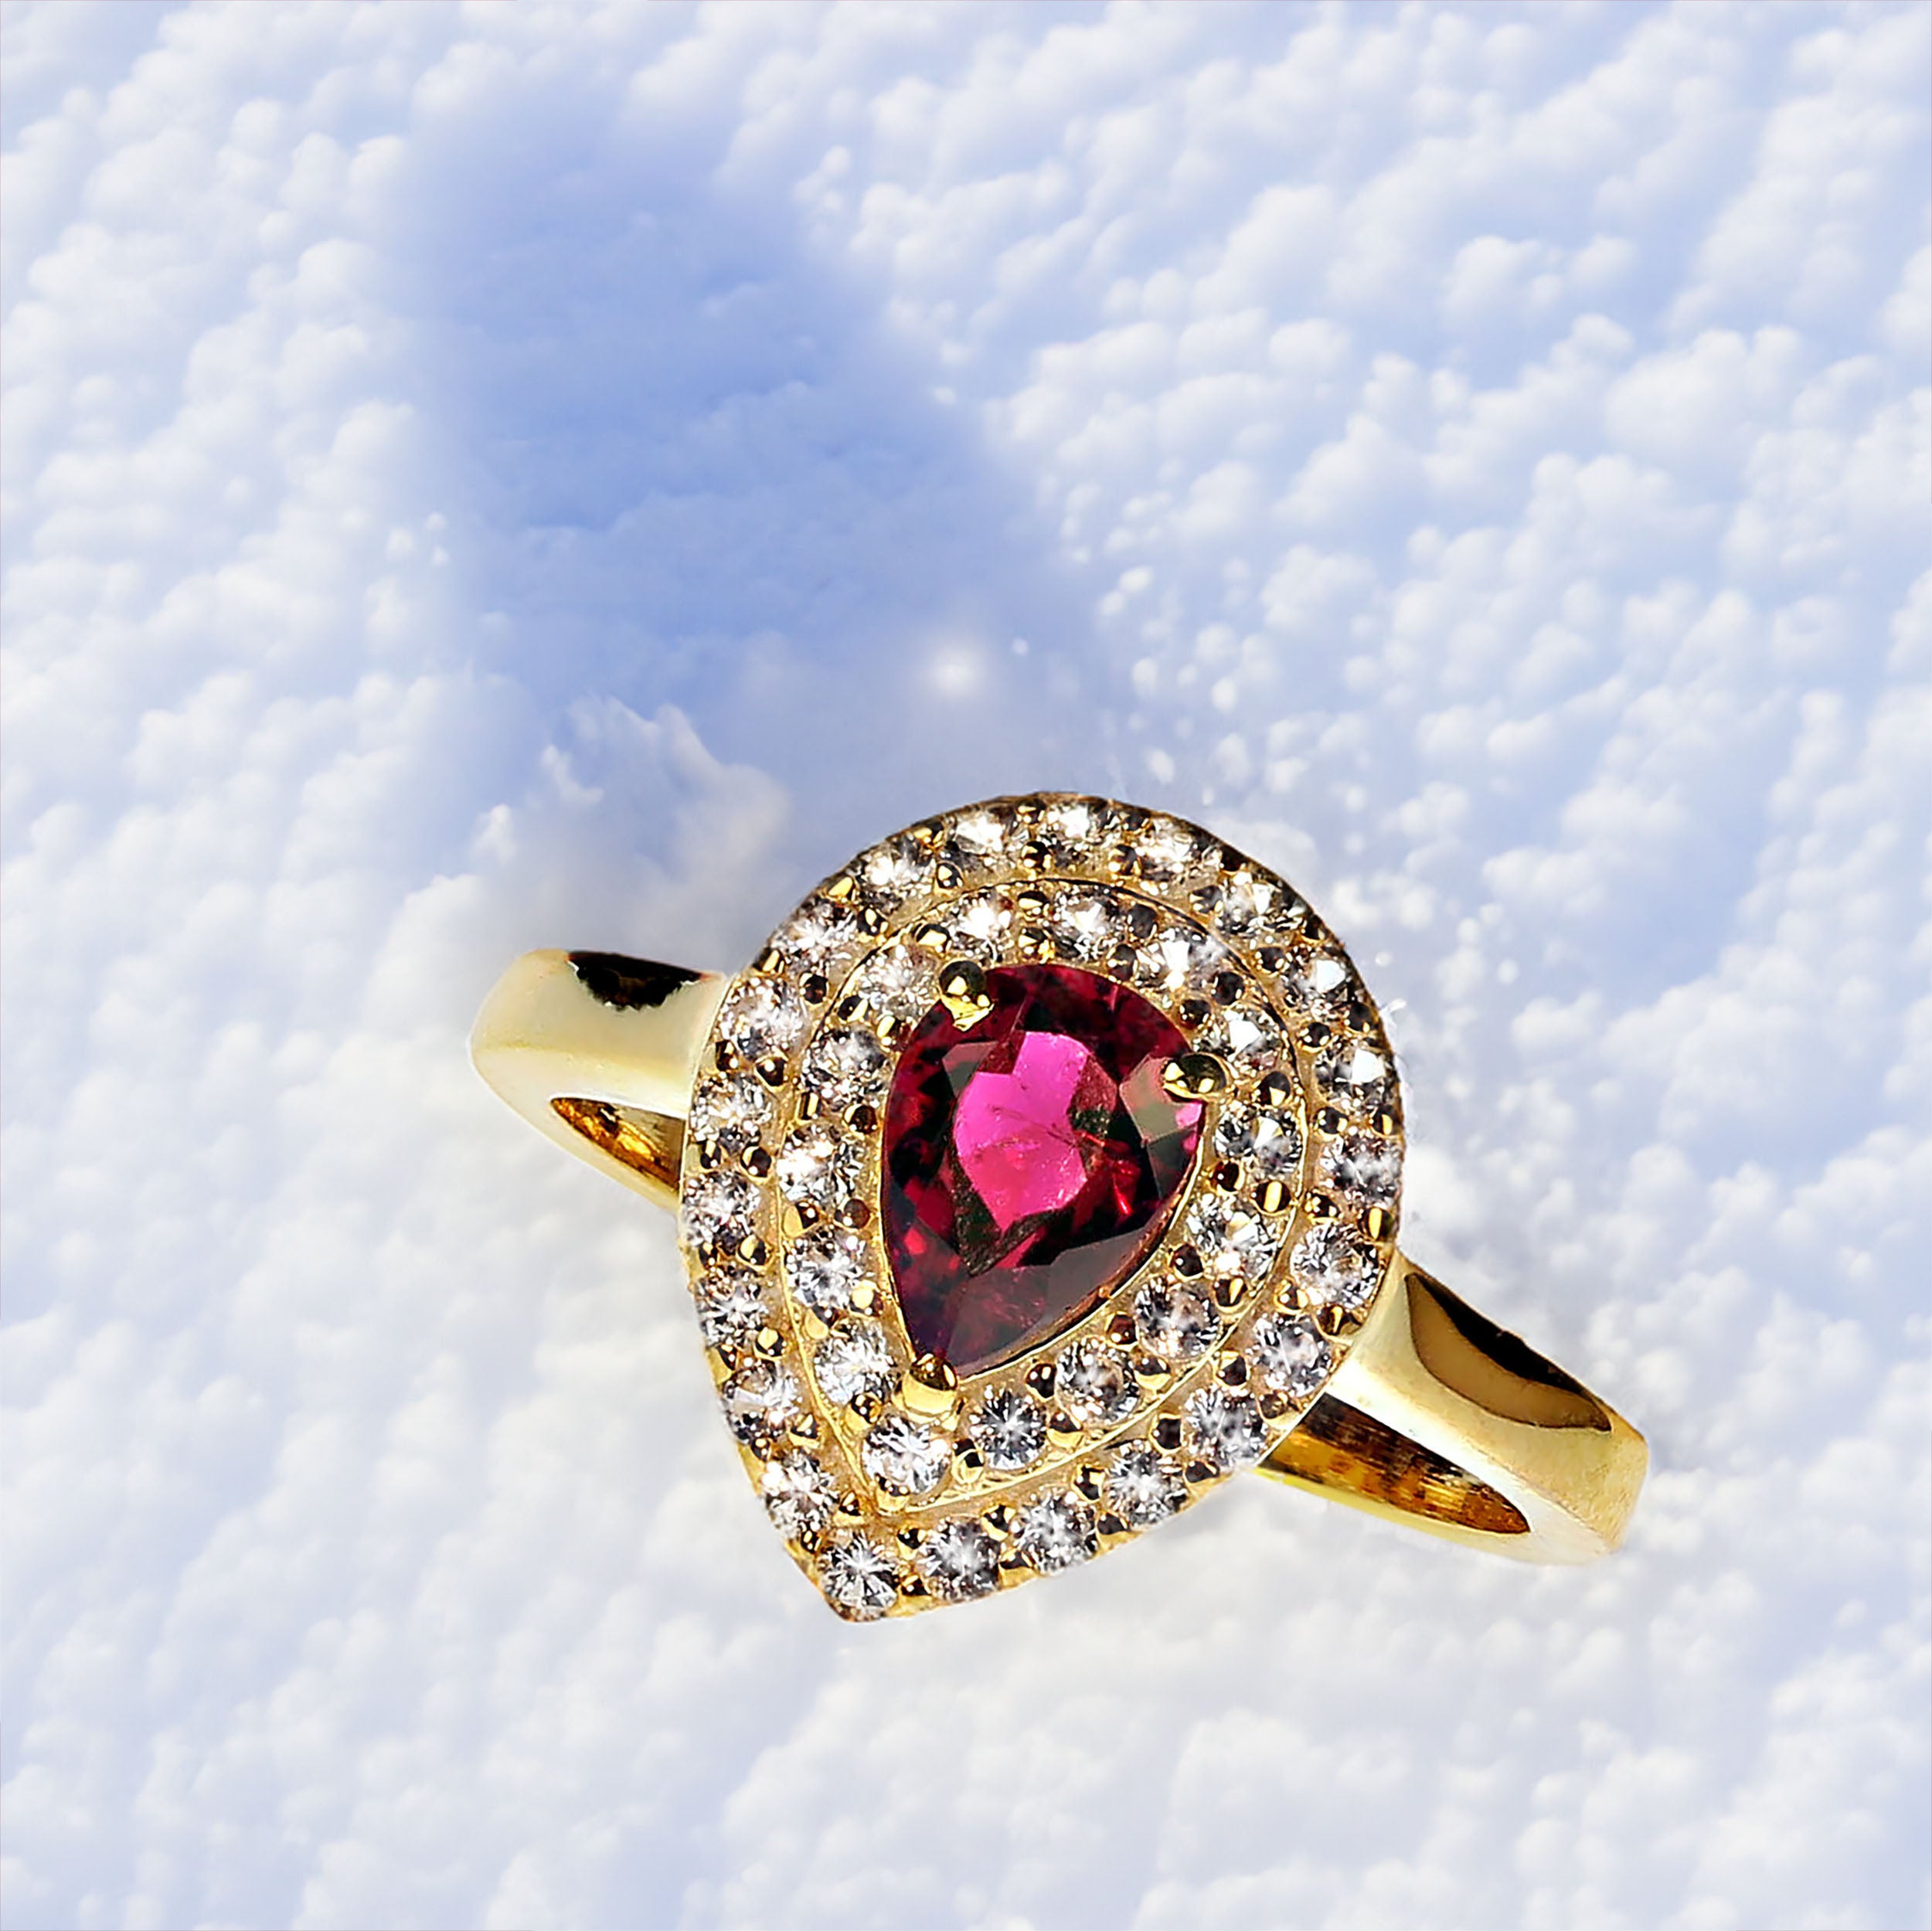 Stunning redish pink rubelite with two surrounds of sparkling white sapphires all set in gold rhodium over sterling silver.  This goreous unique ring will be your go to dinner ring.  The 0.89ct rubelite comes from the Ouro Preto area of Minas